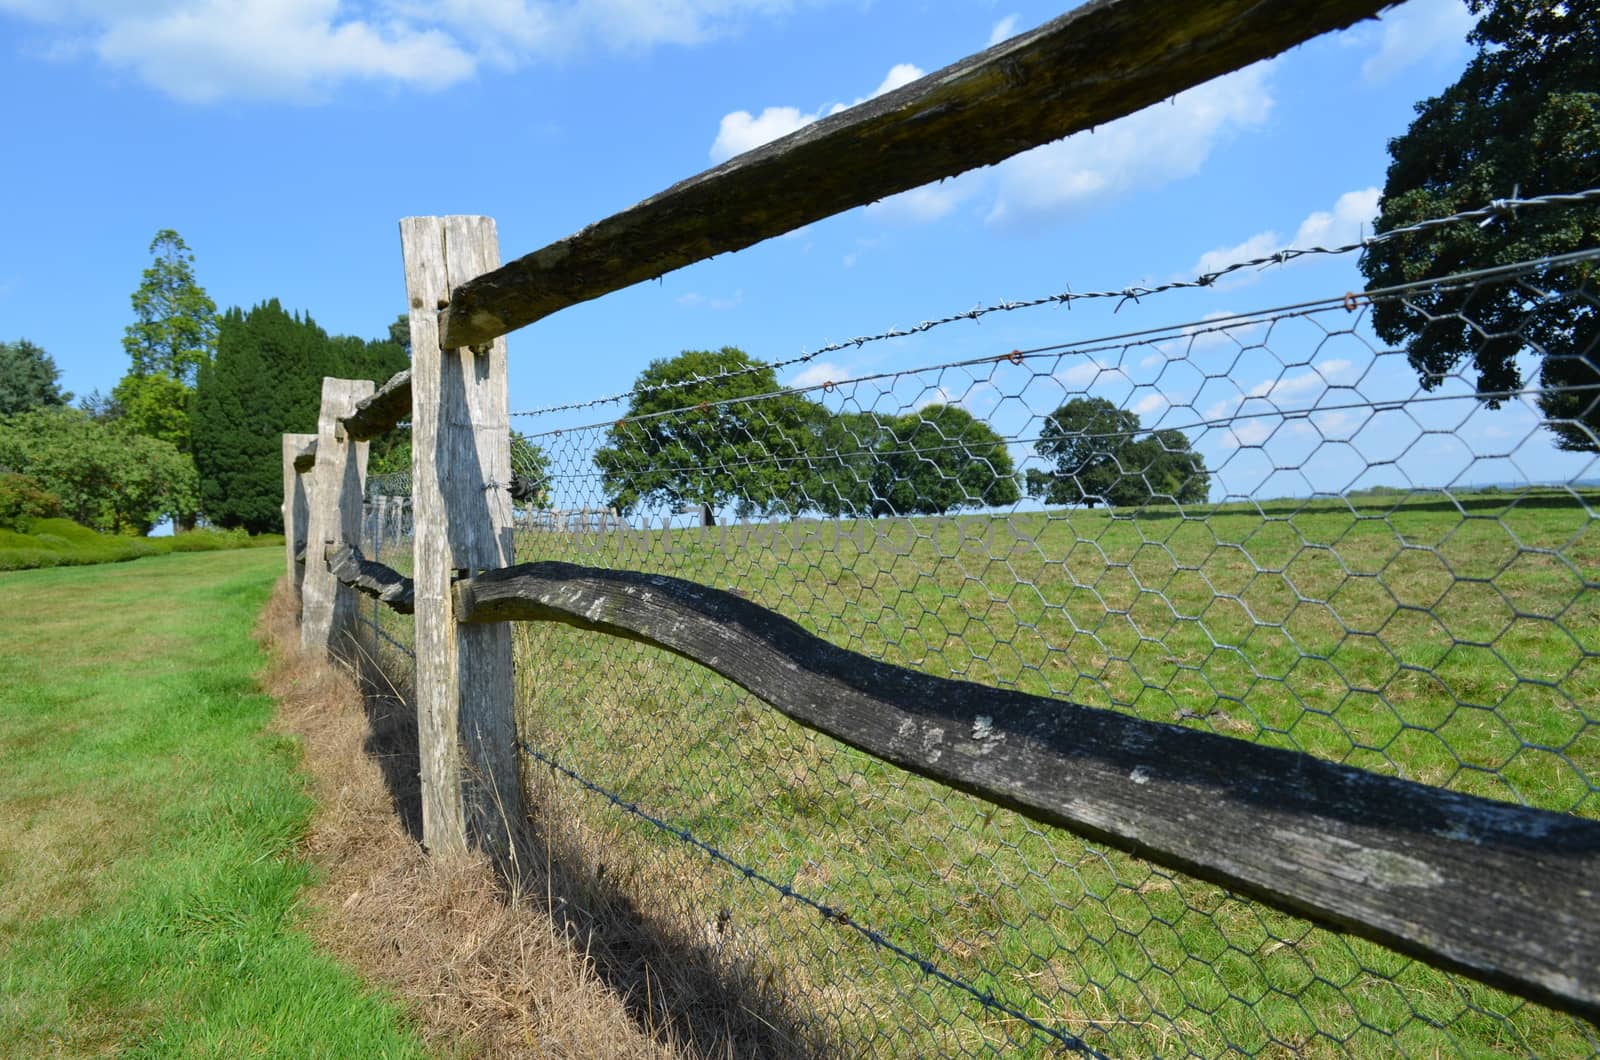 Wood fence with wire along the boundary of a pasture field in Sussex,England.